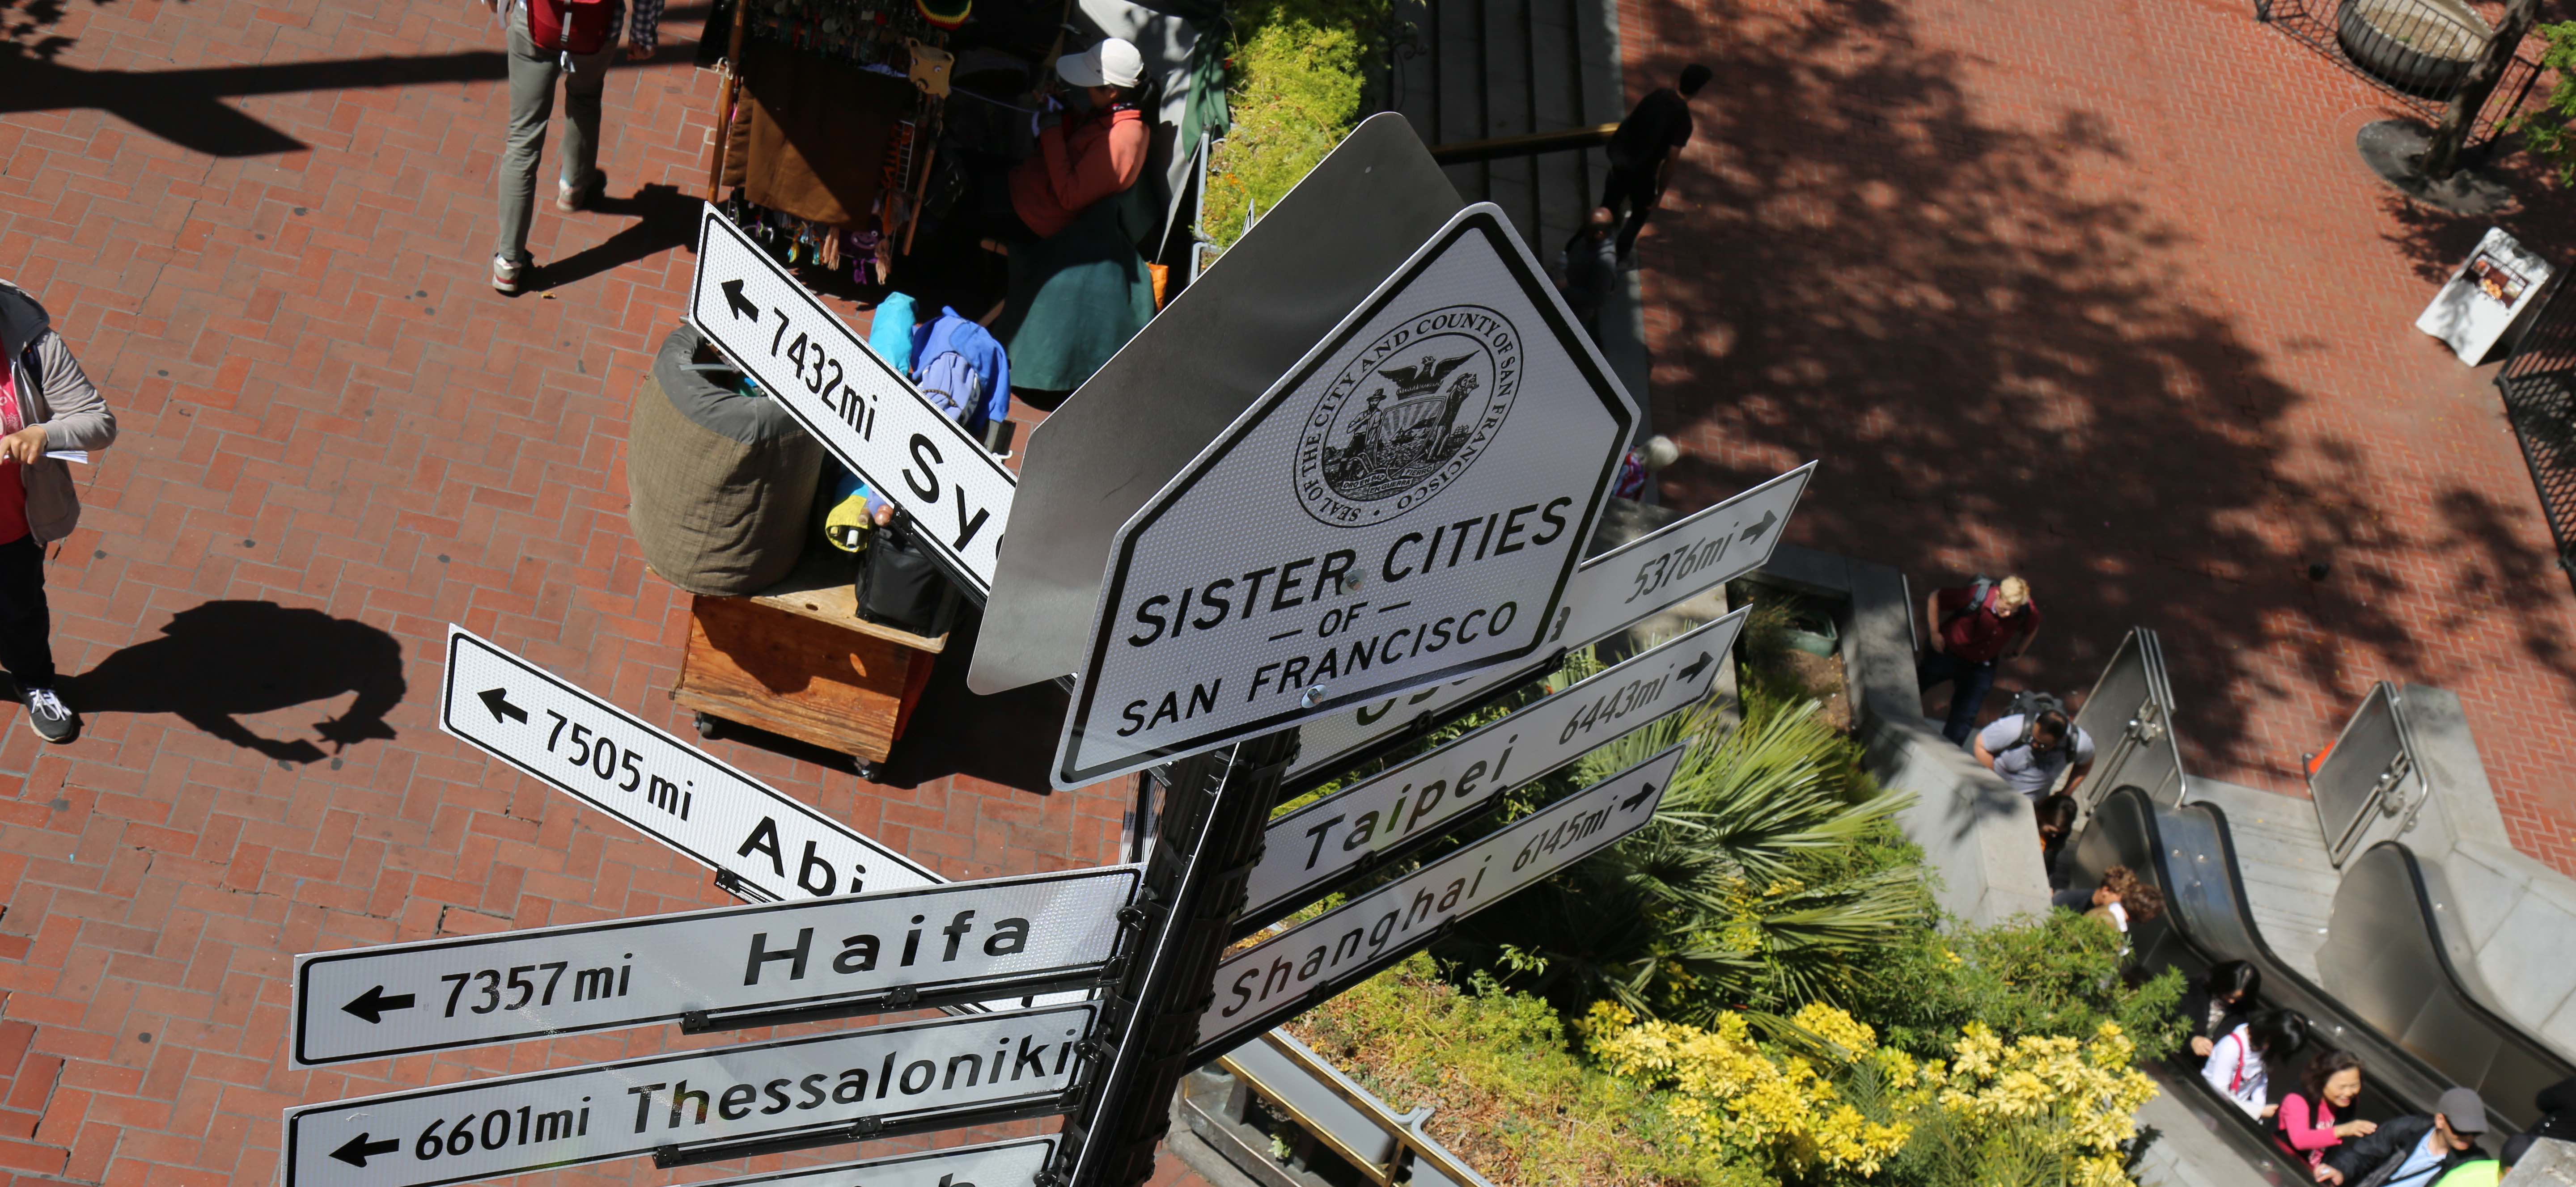 sister cities sign